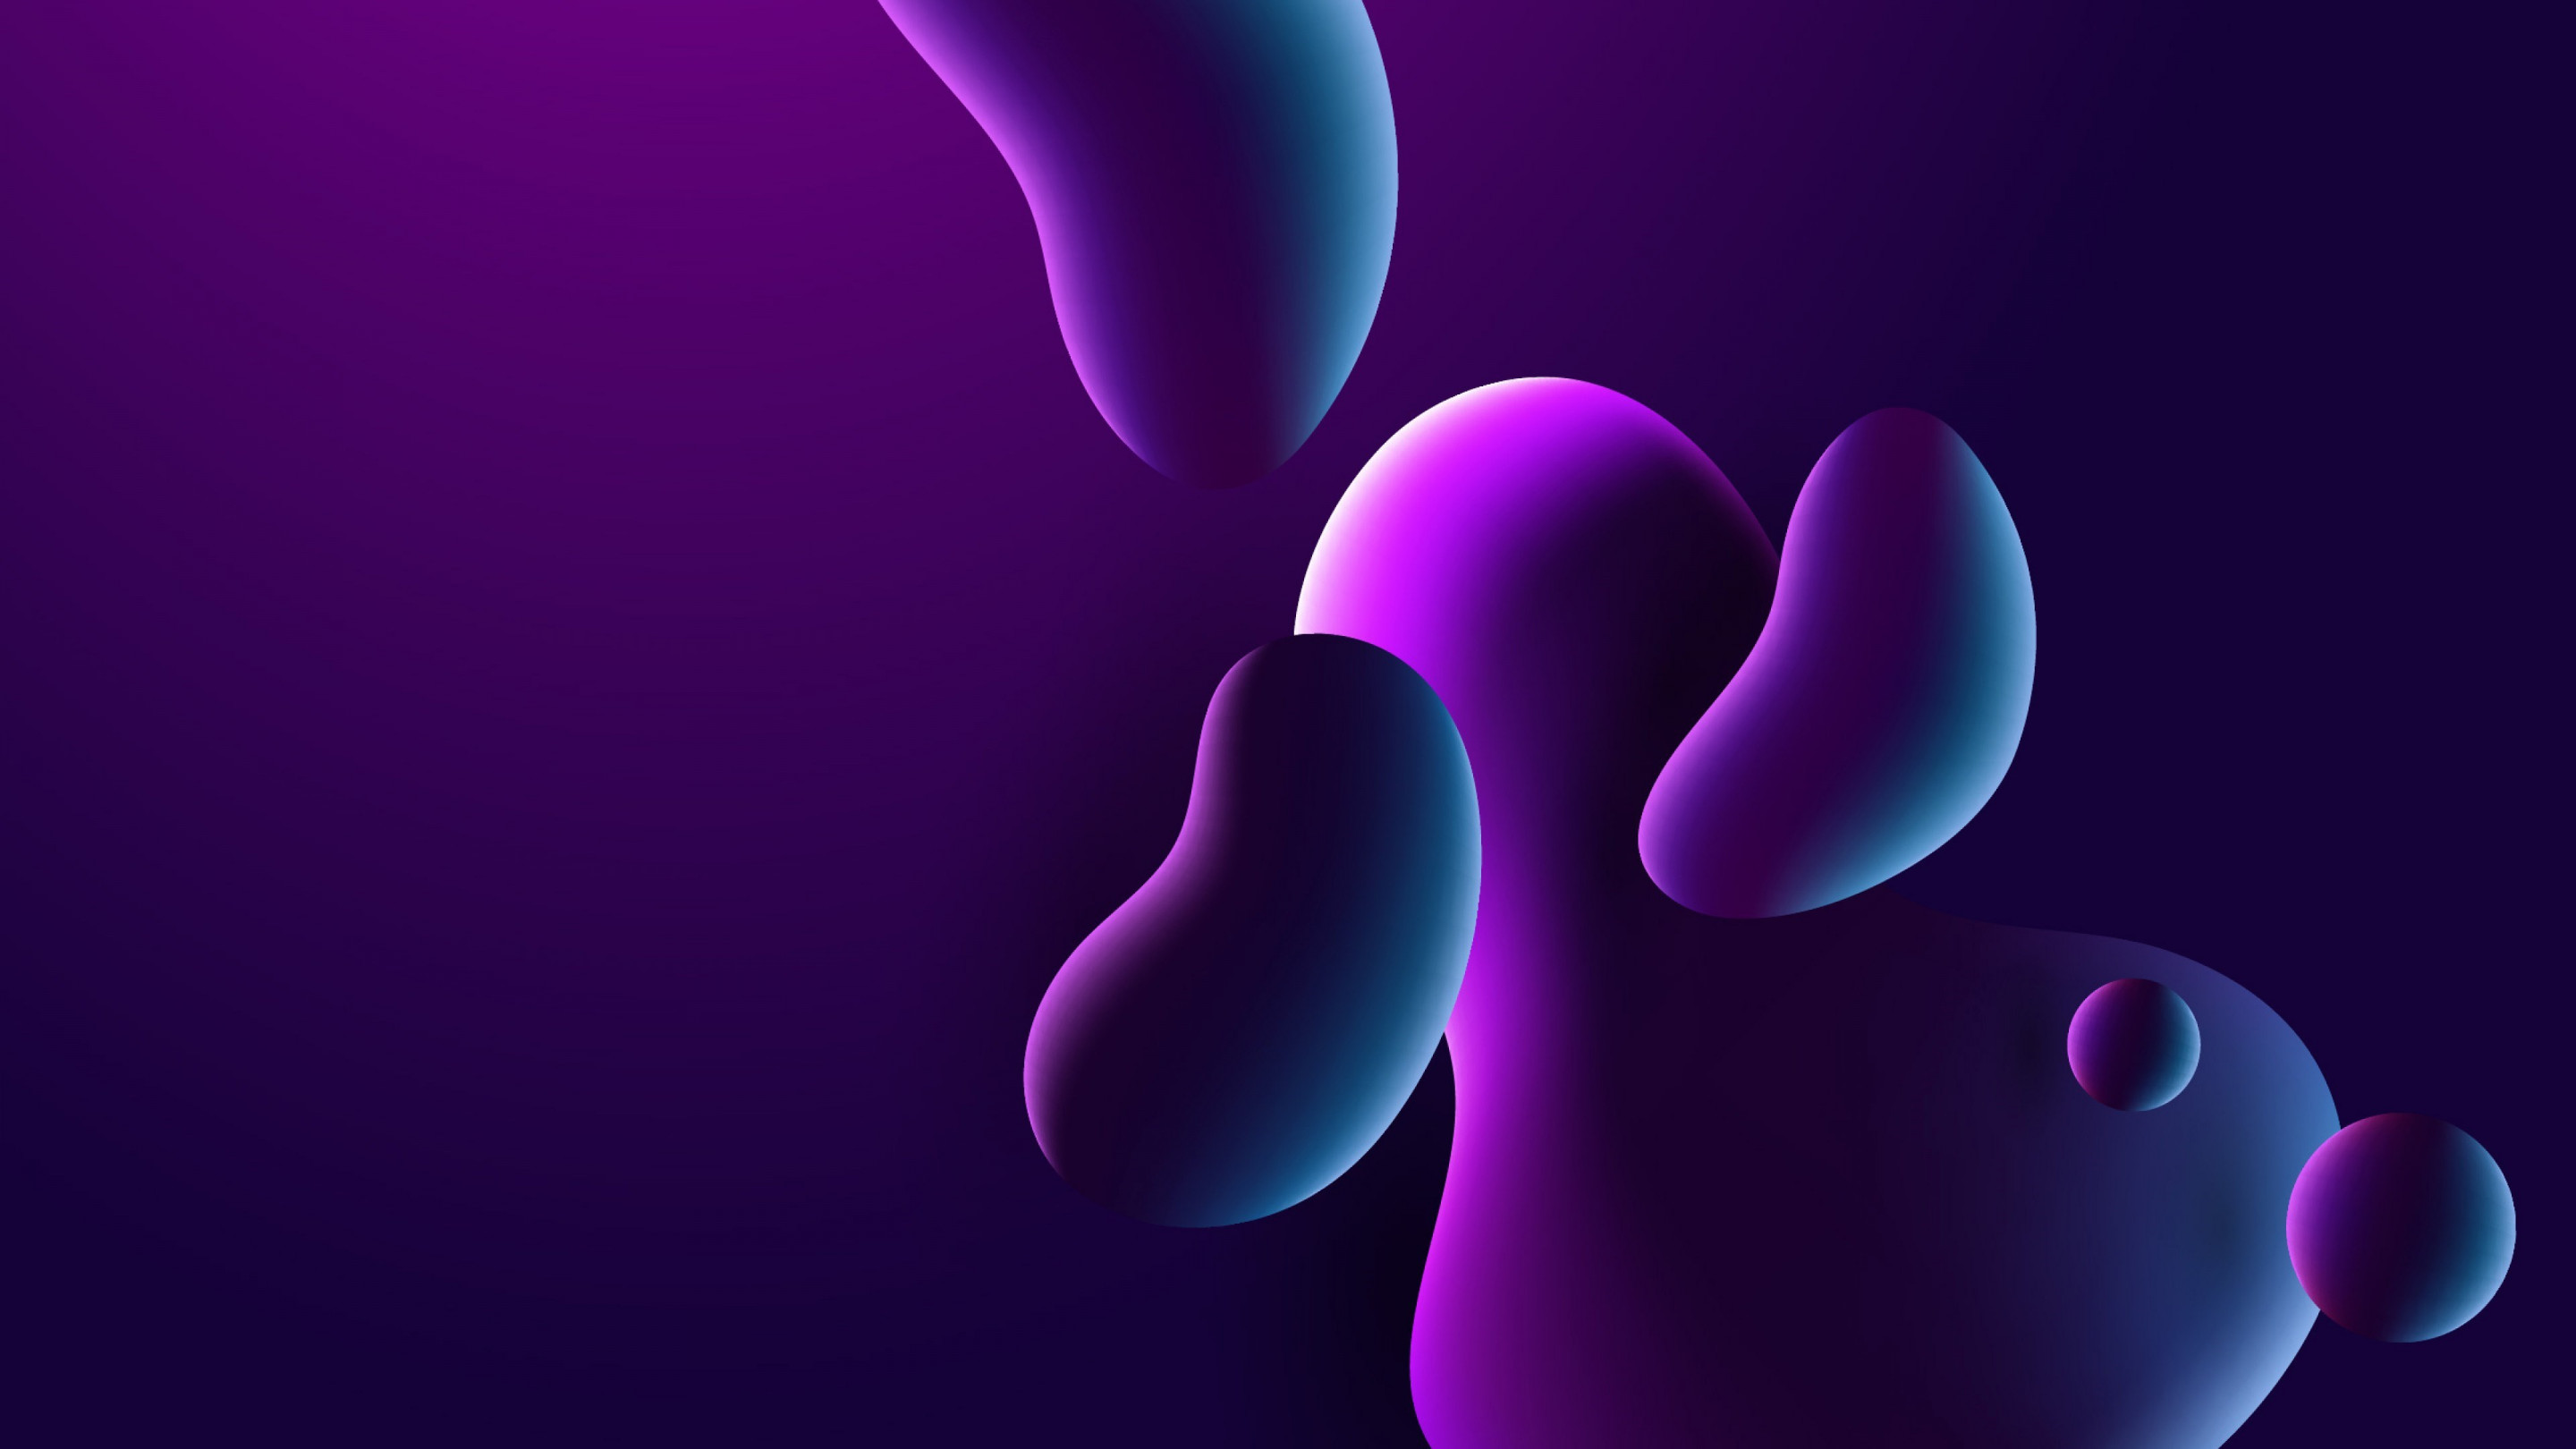 OnePlus 7T Pro, stock, bubble, abstract wallpaper 2880x1620